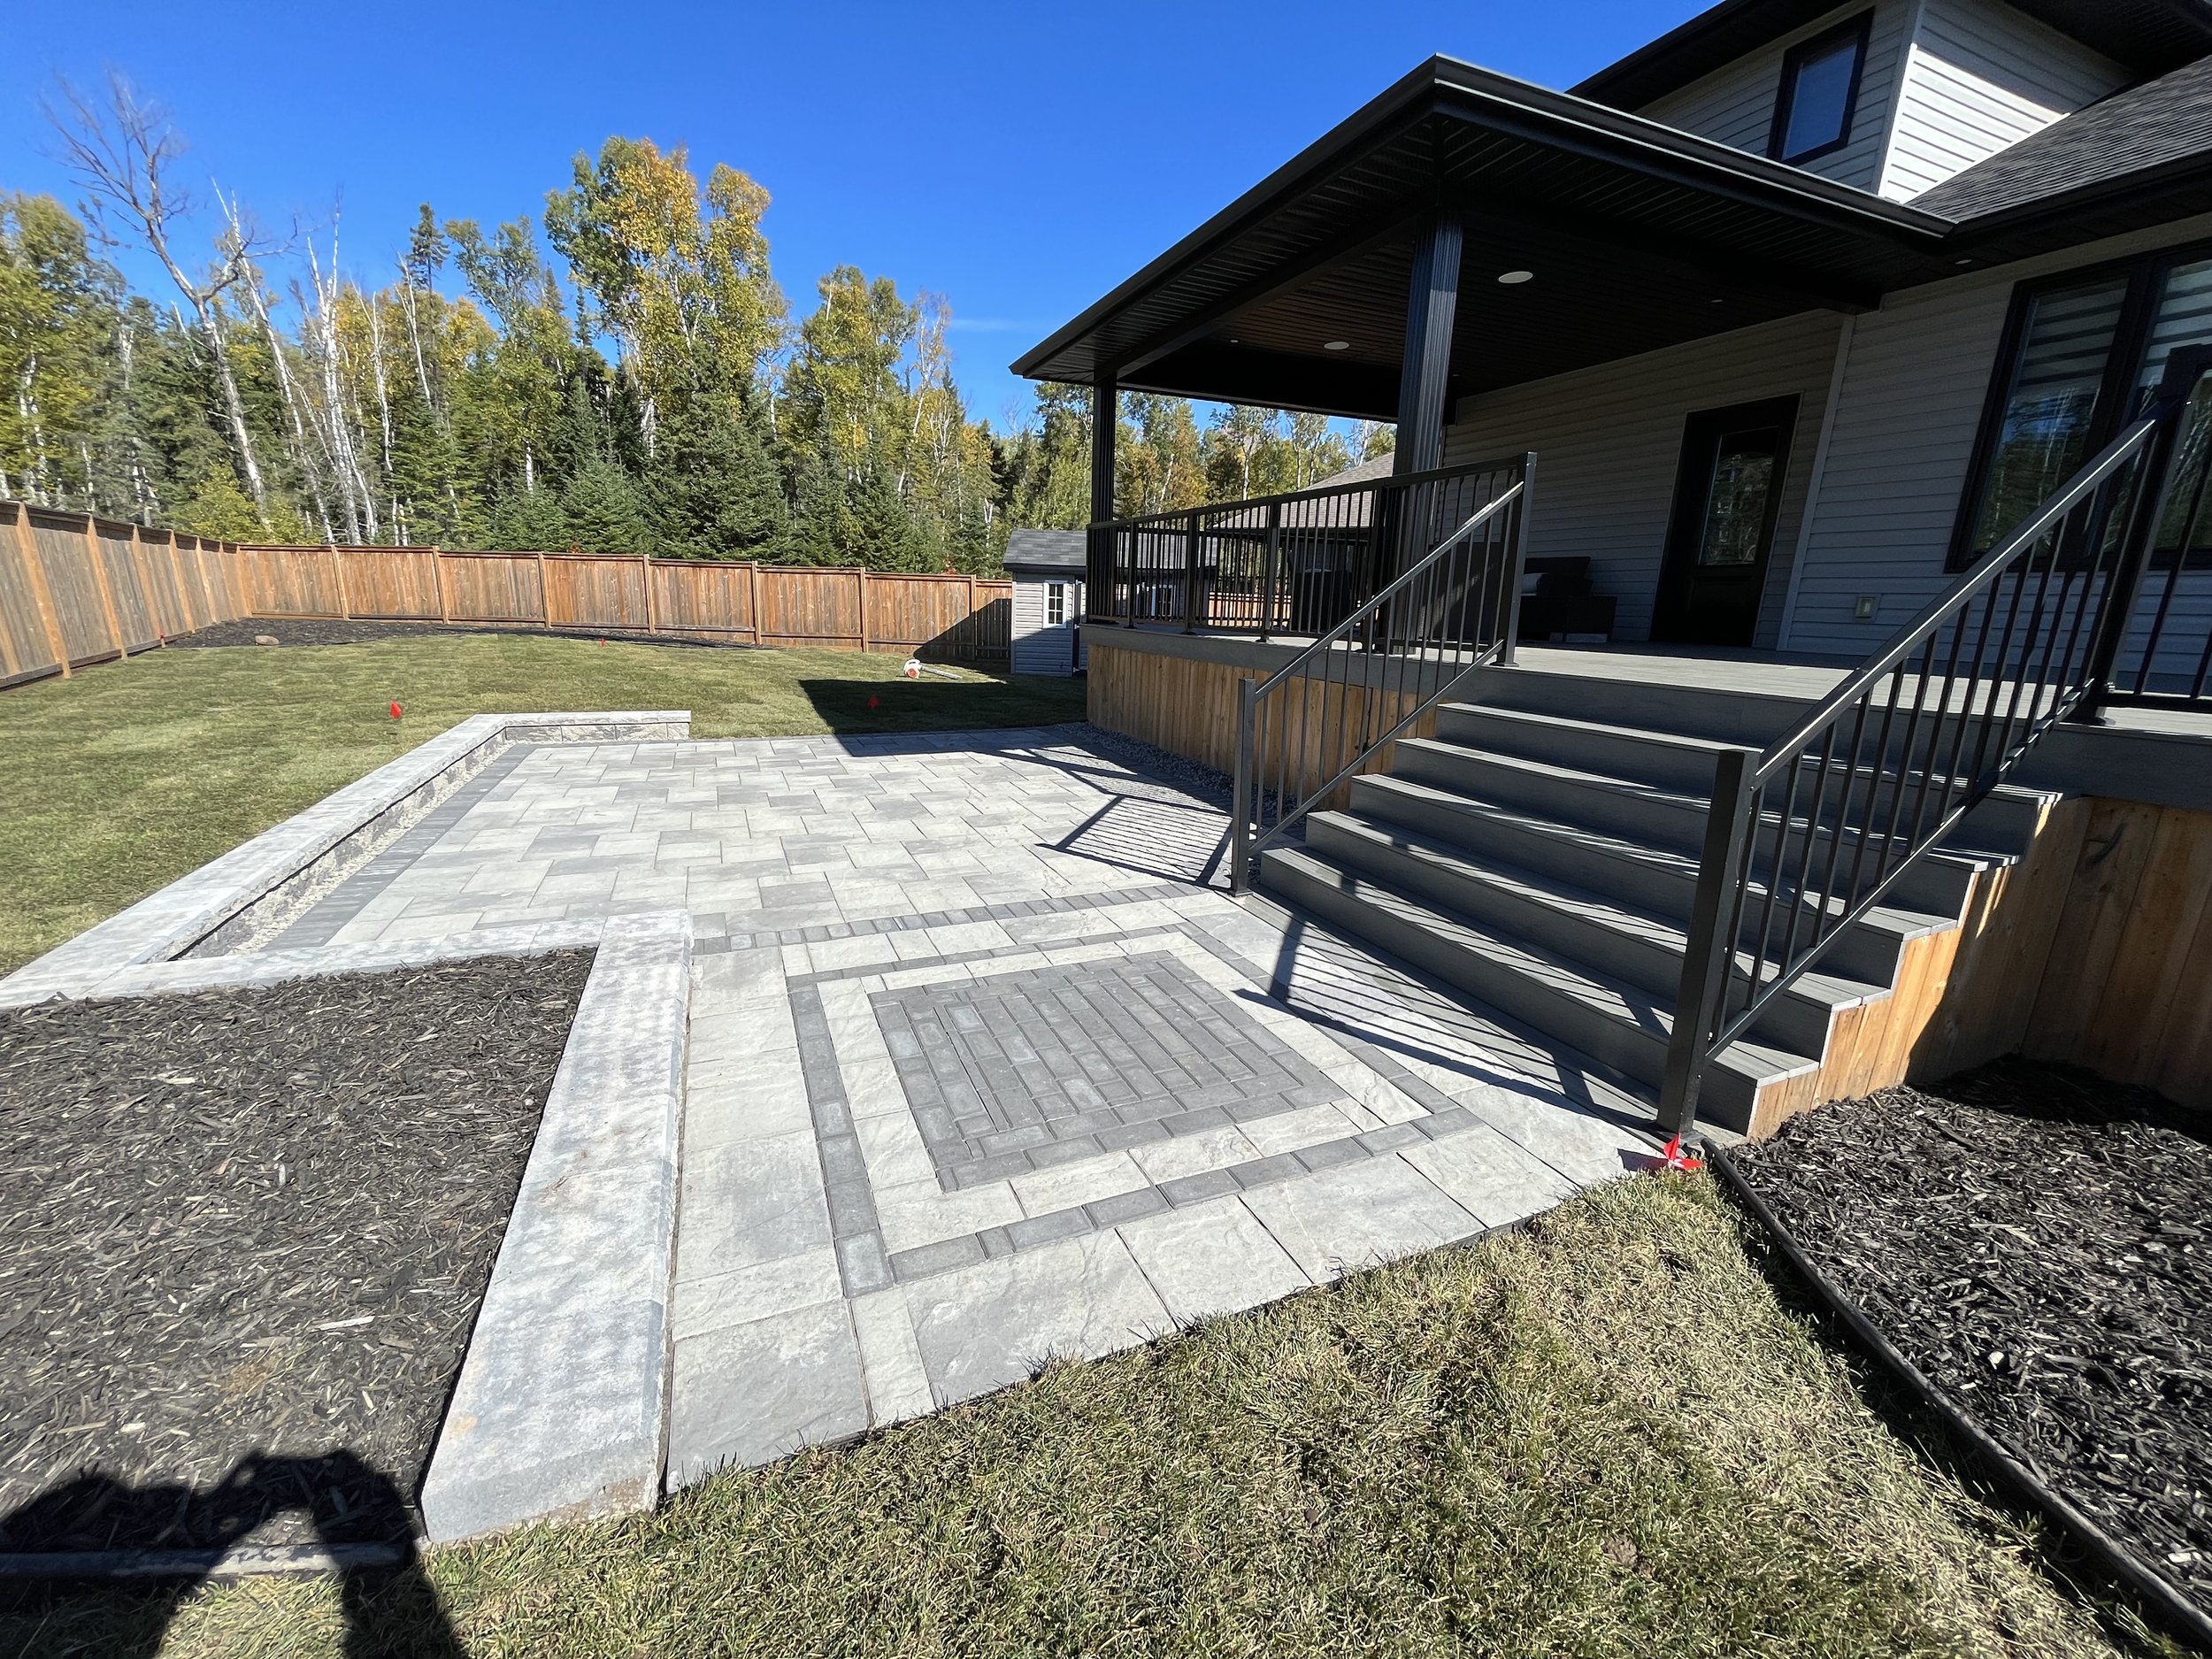 Browns Appian Paver Patio with a retaining wall and Inlay